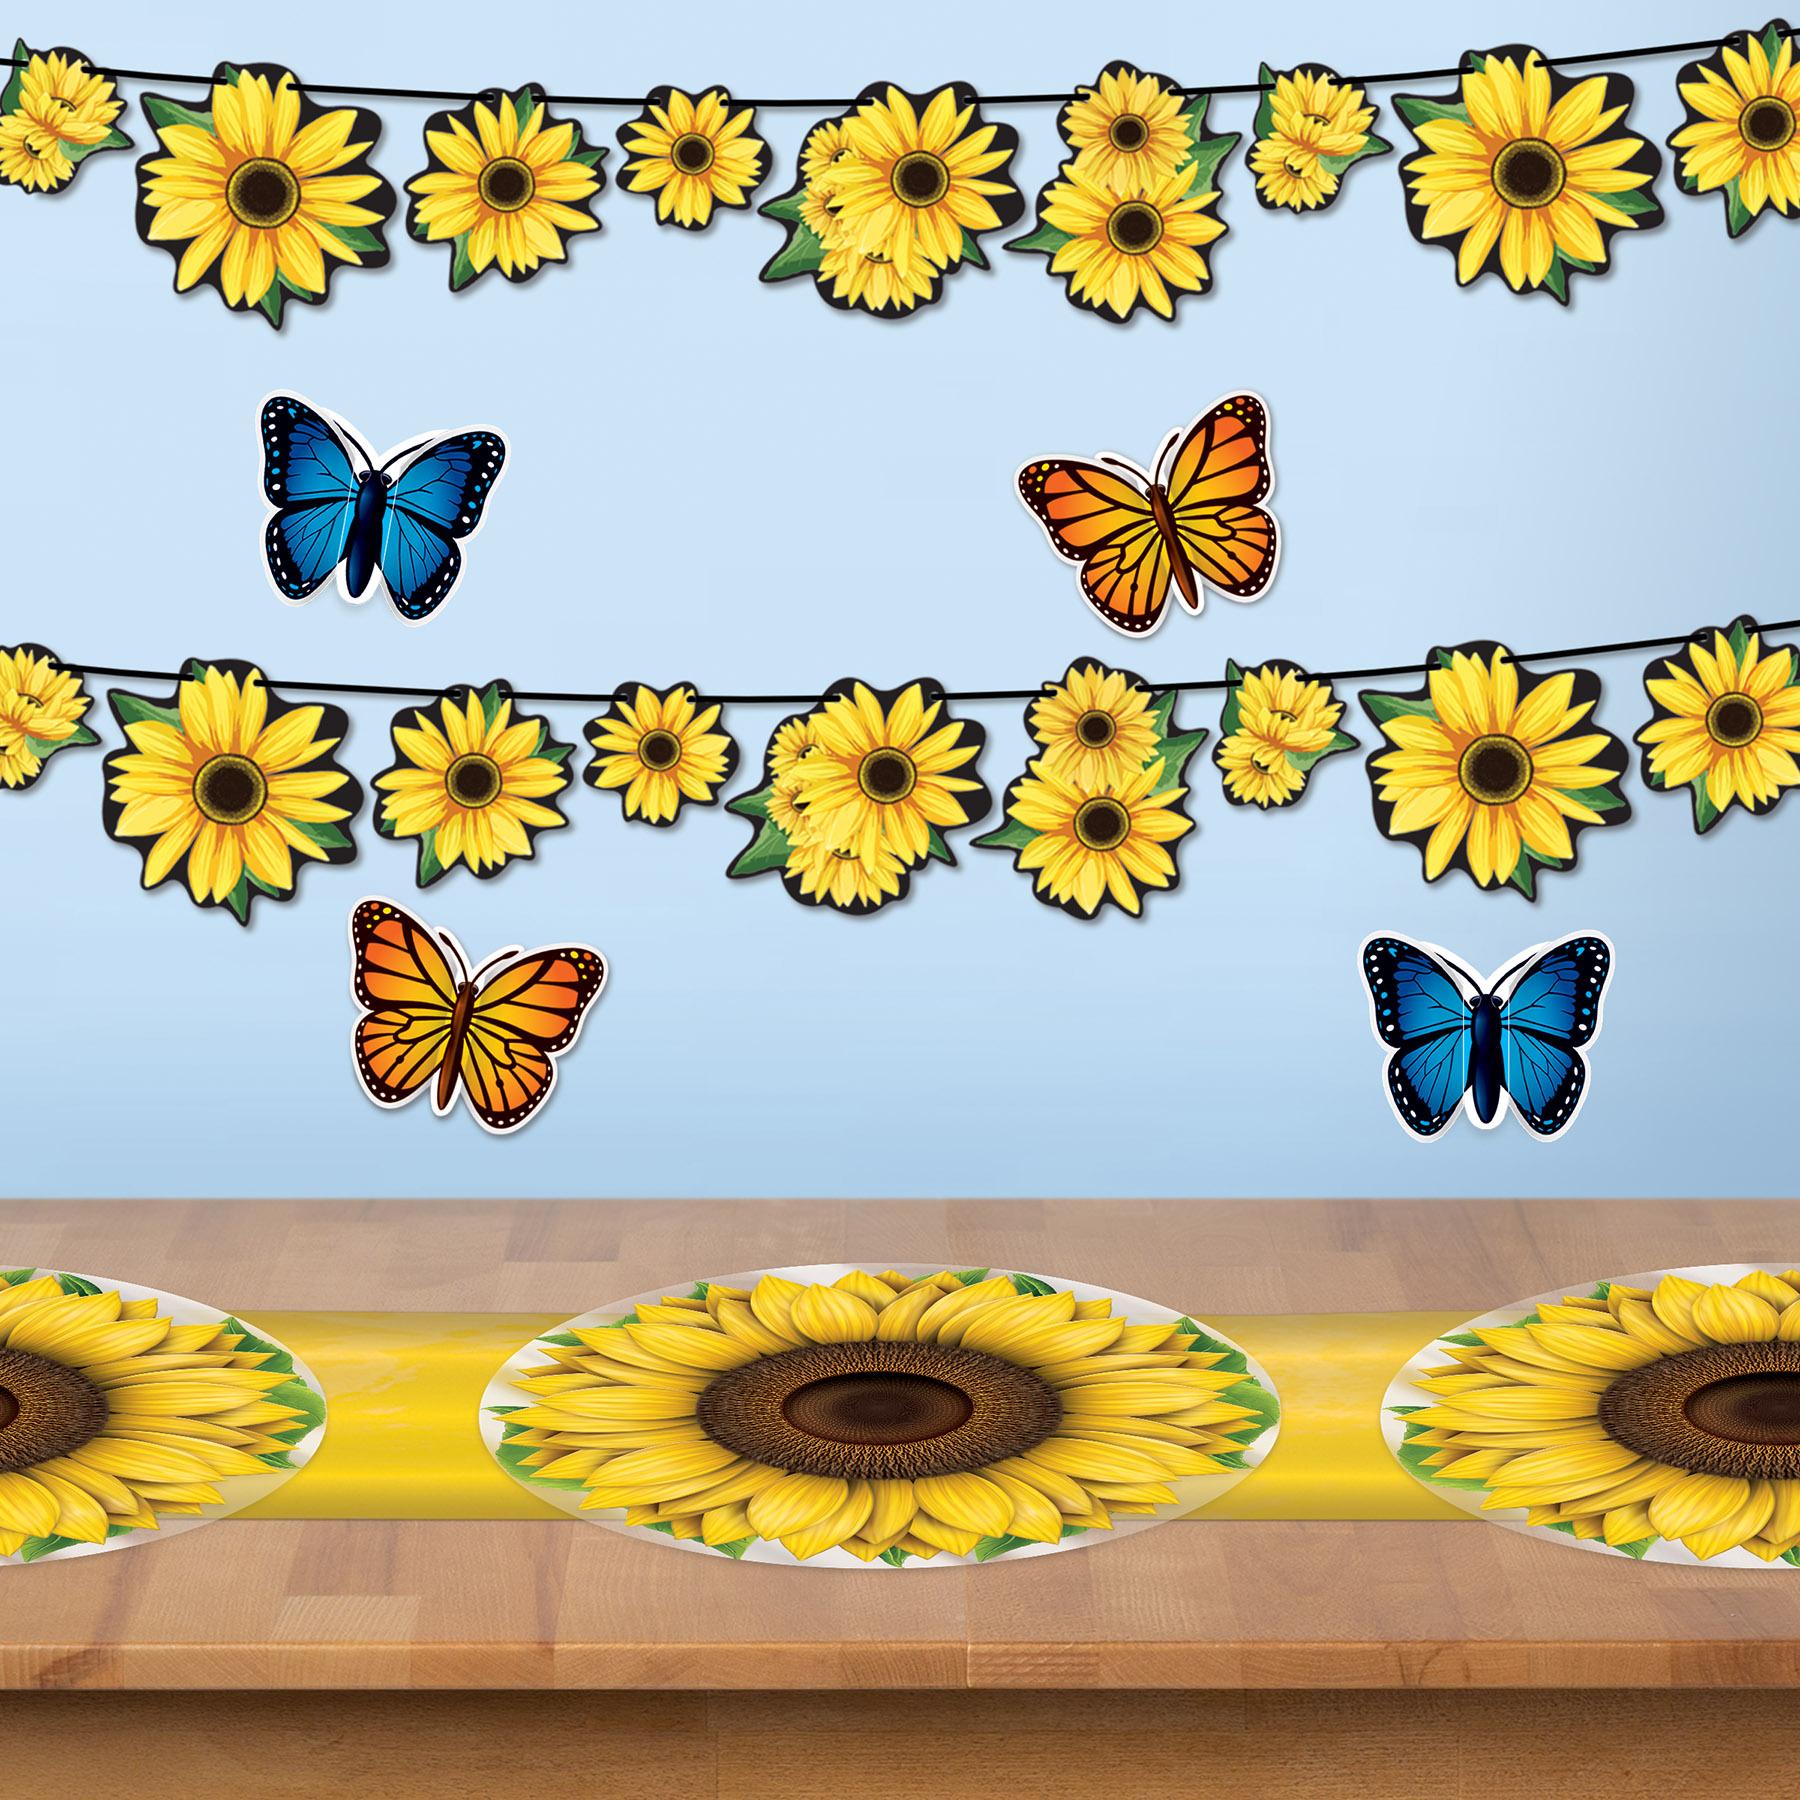 Beistle Plastic Sunflower Round Party Placemats